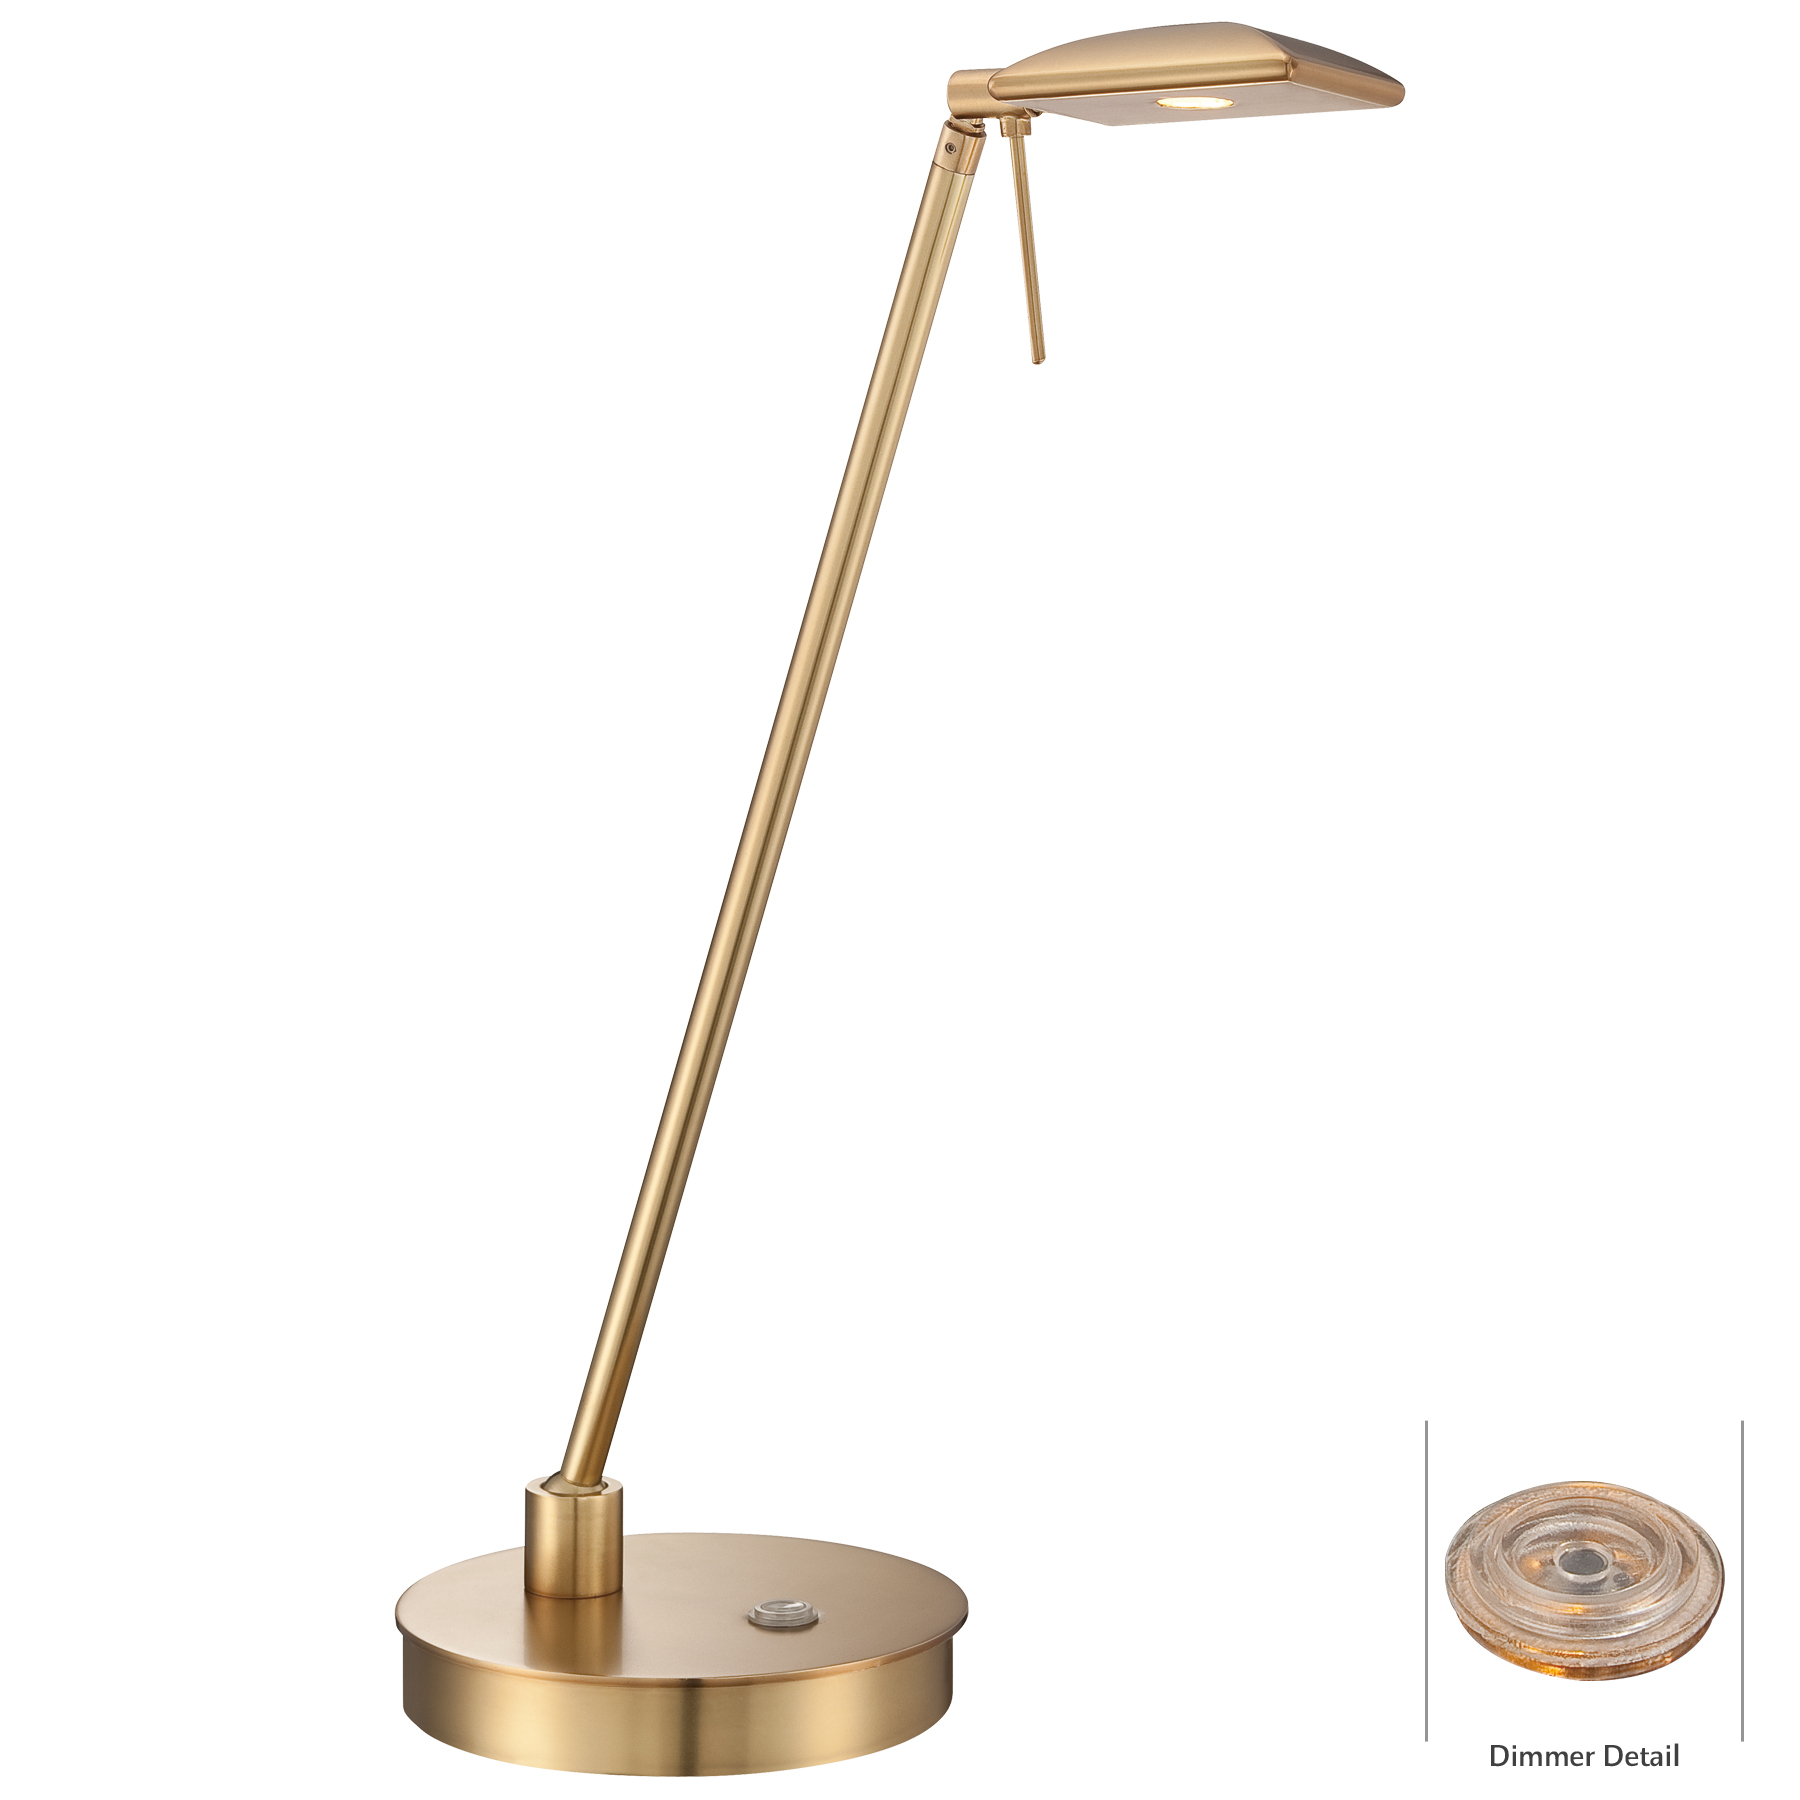 Georges Reading Room LED Square Head Desk Lamp by George Kovacs P4326-248  GKV64352